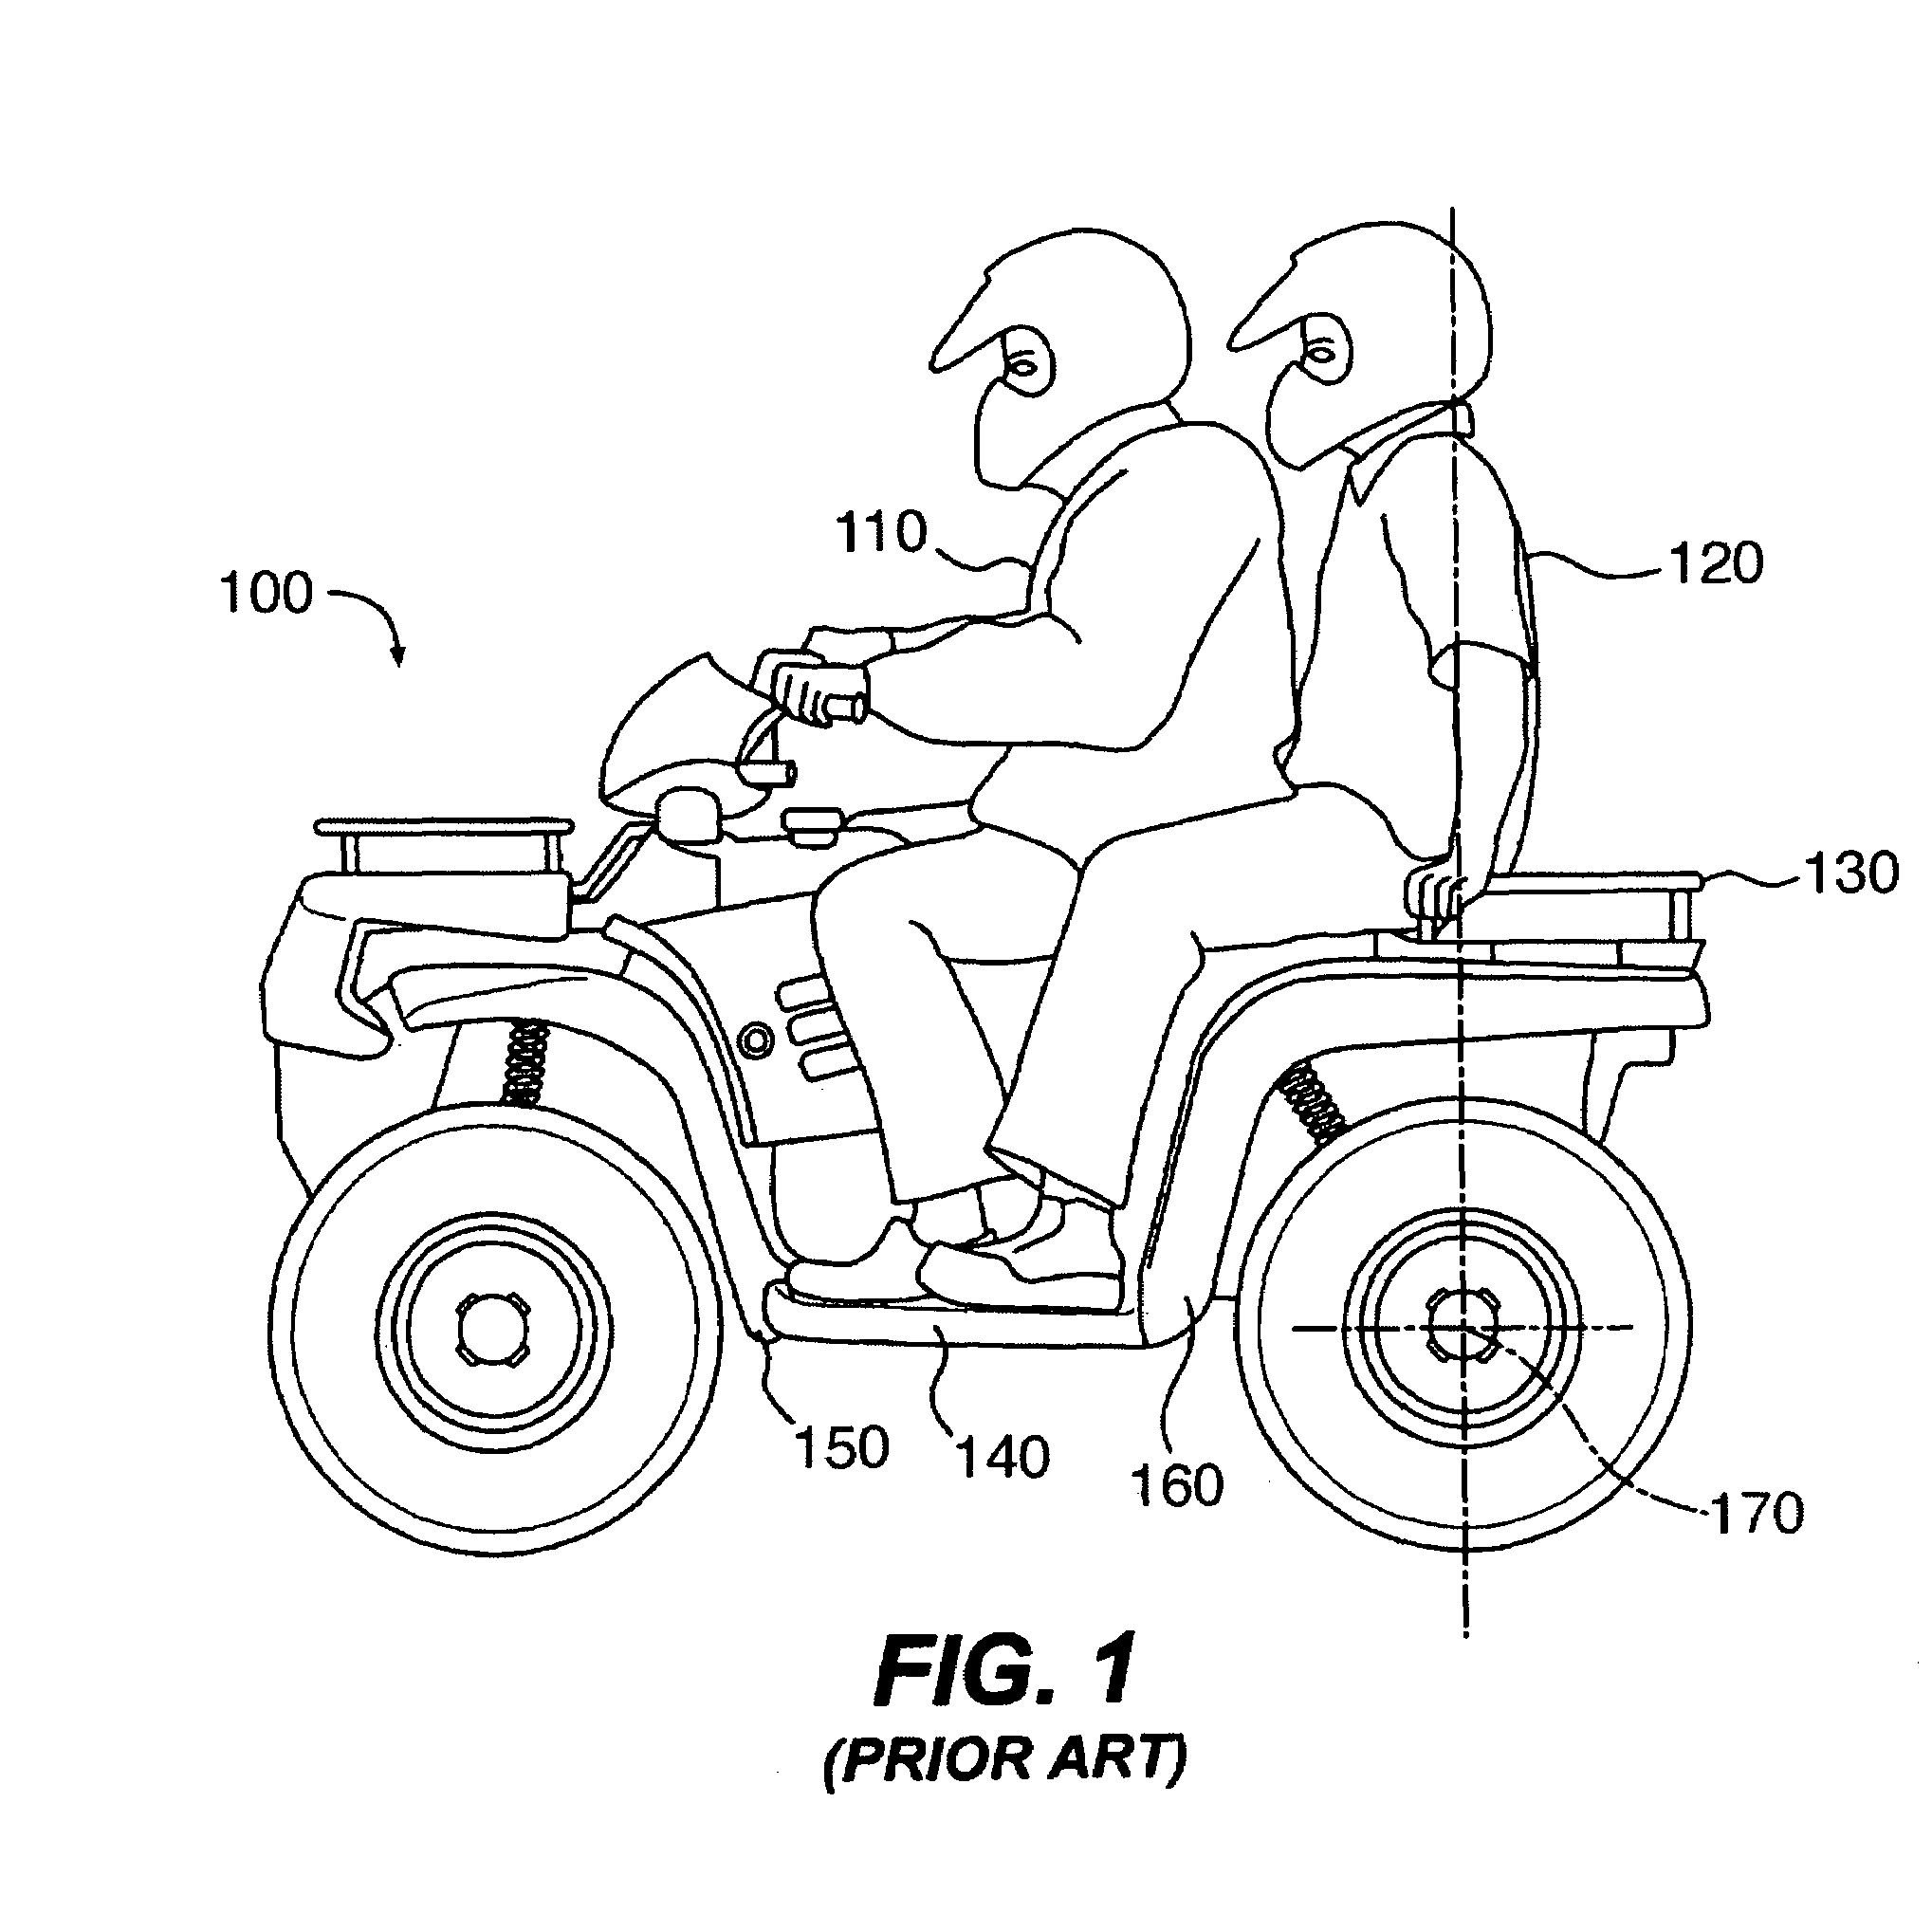 Flip-down footrests for an all-terrain vehicle